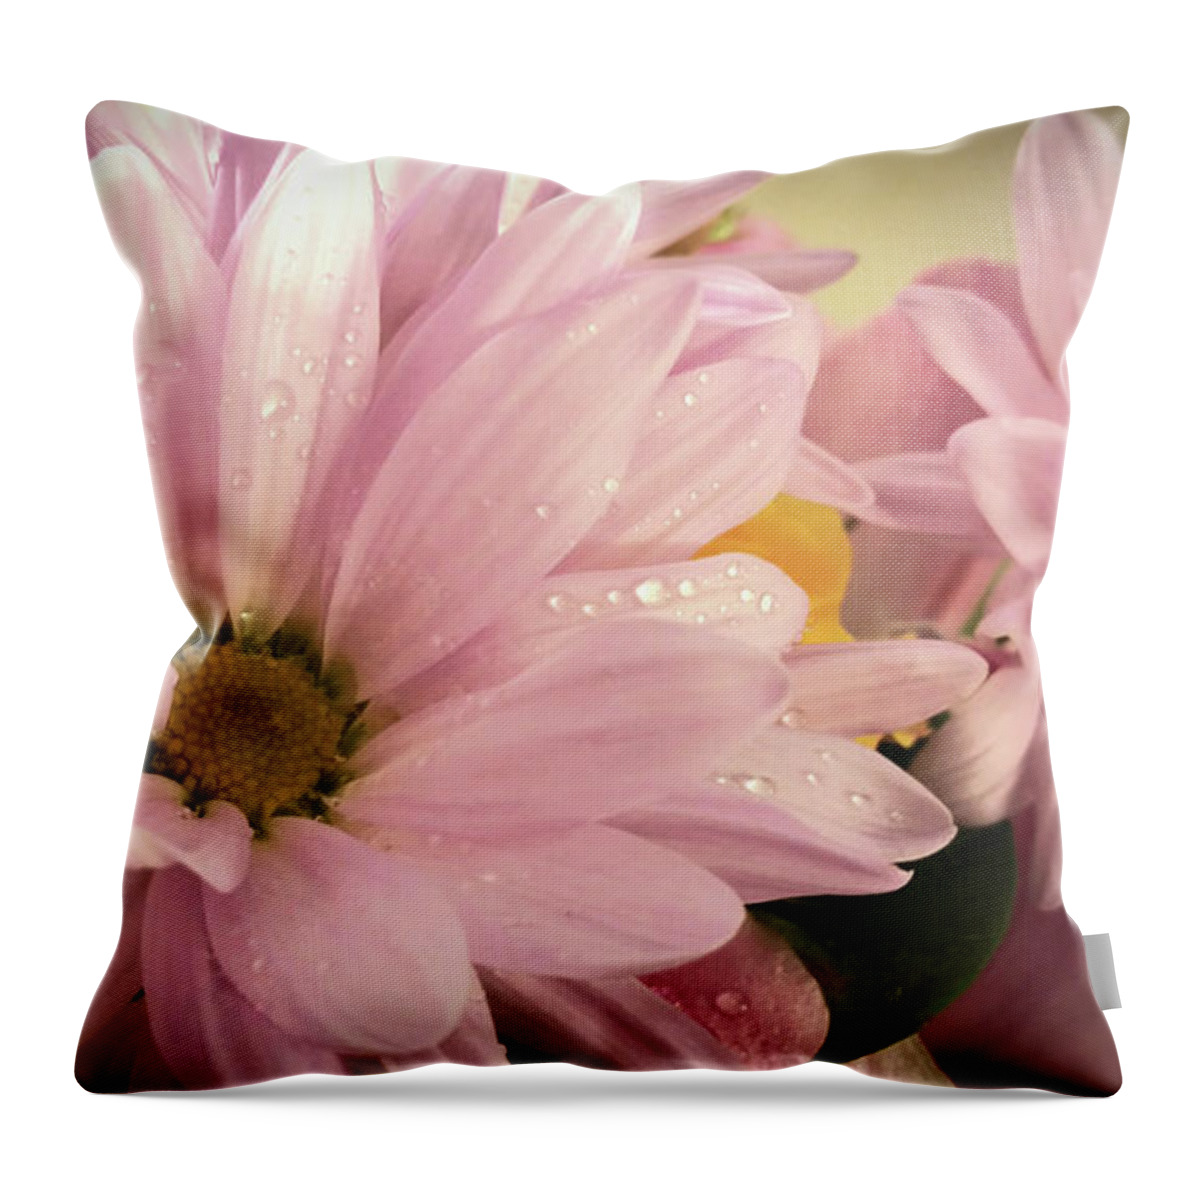 Daisies; Daisy; Flower; Flowers; Pink Flowers; Petals; Pink; Water; Water Drops; Dew; Wet; Horizontal Throw Pillow featuring the photograph Daisy Bouquet by Tina Uihlein